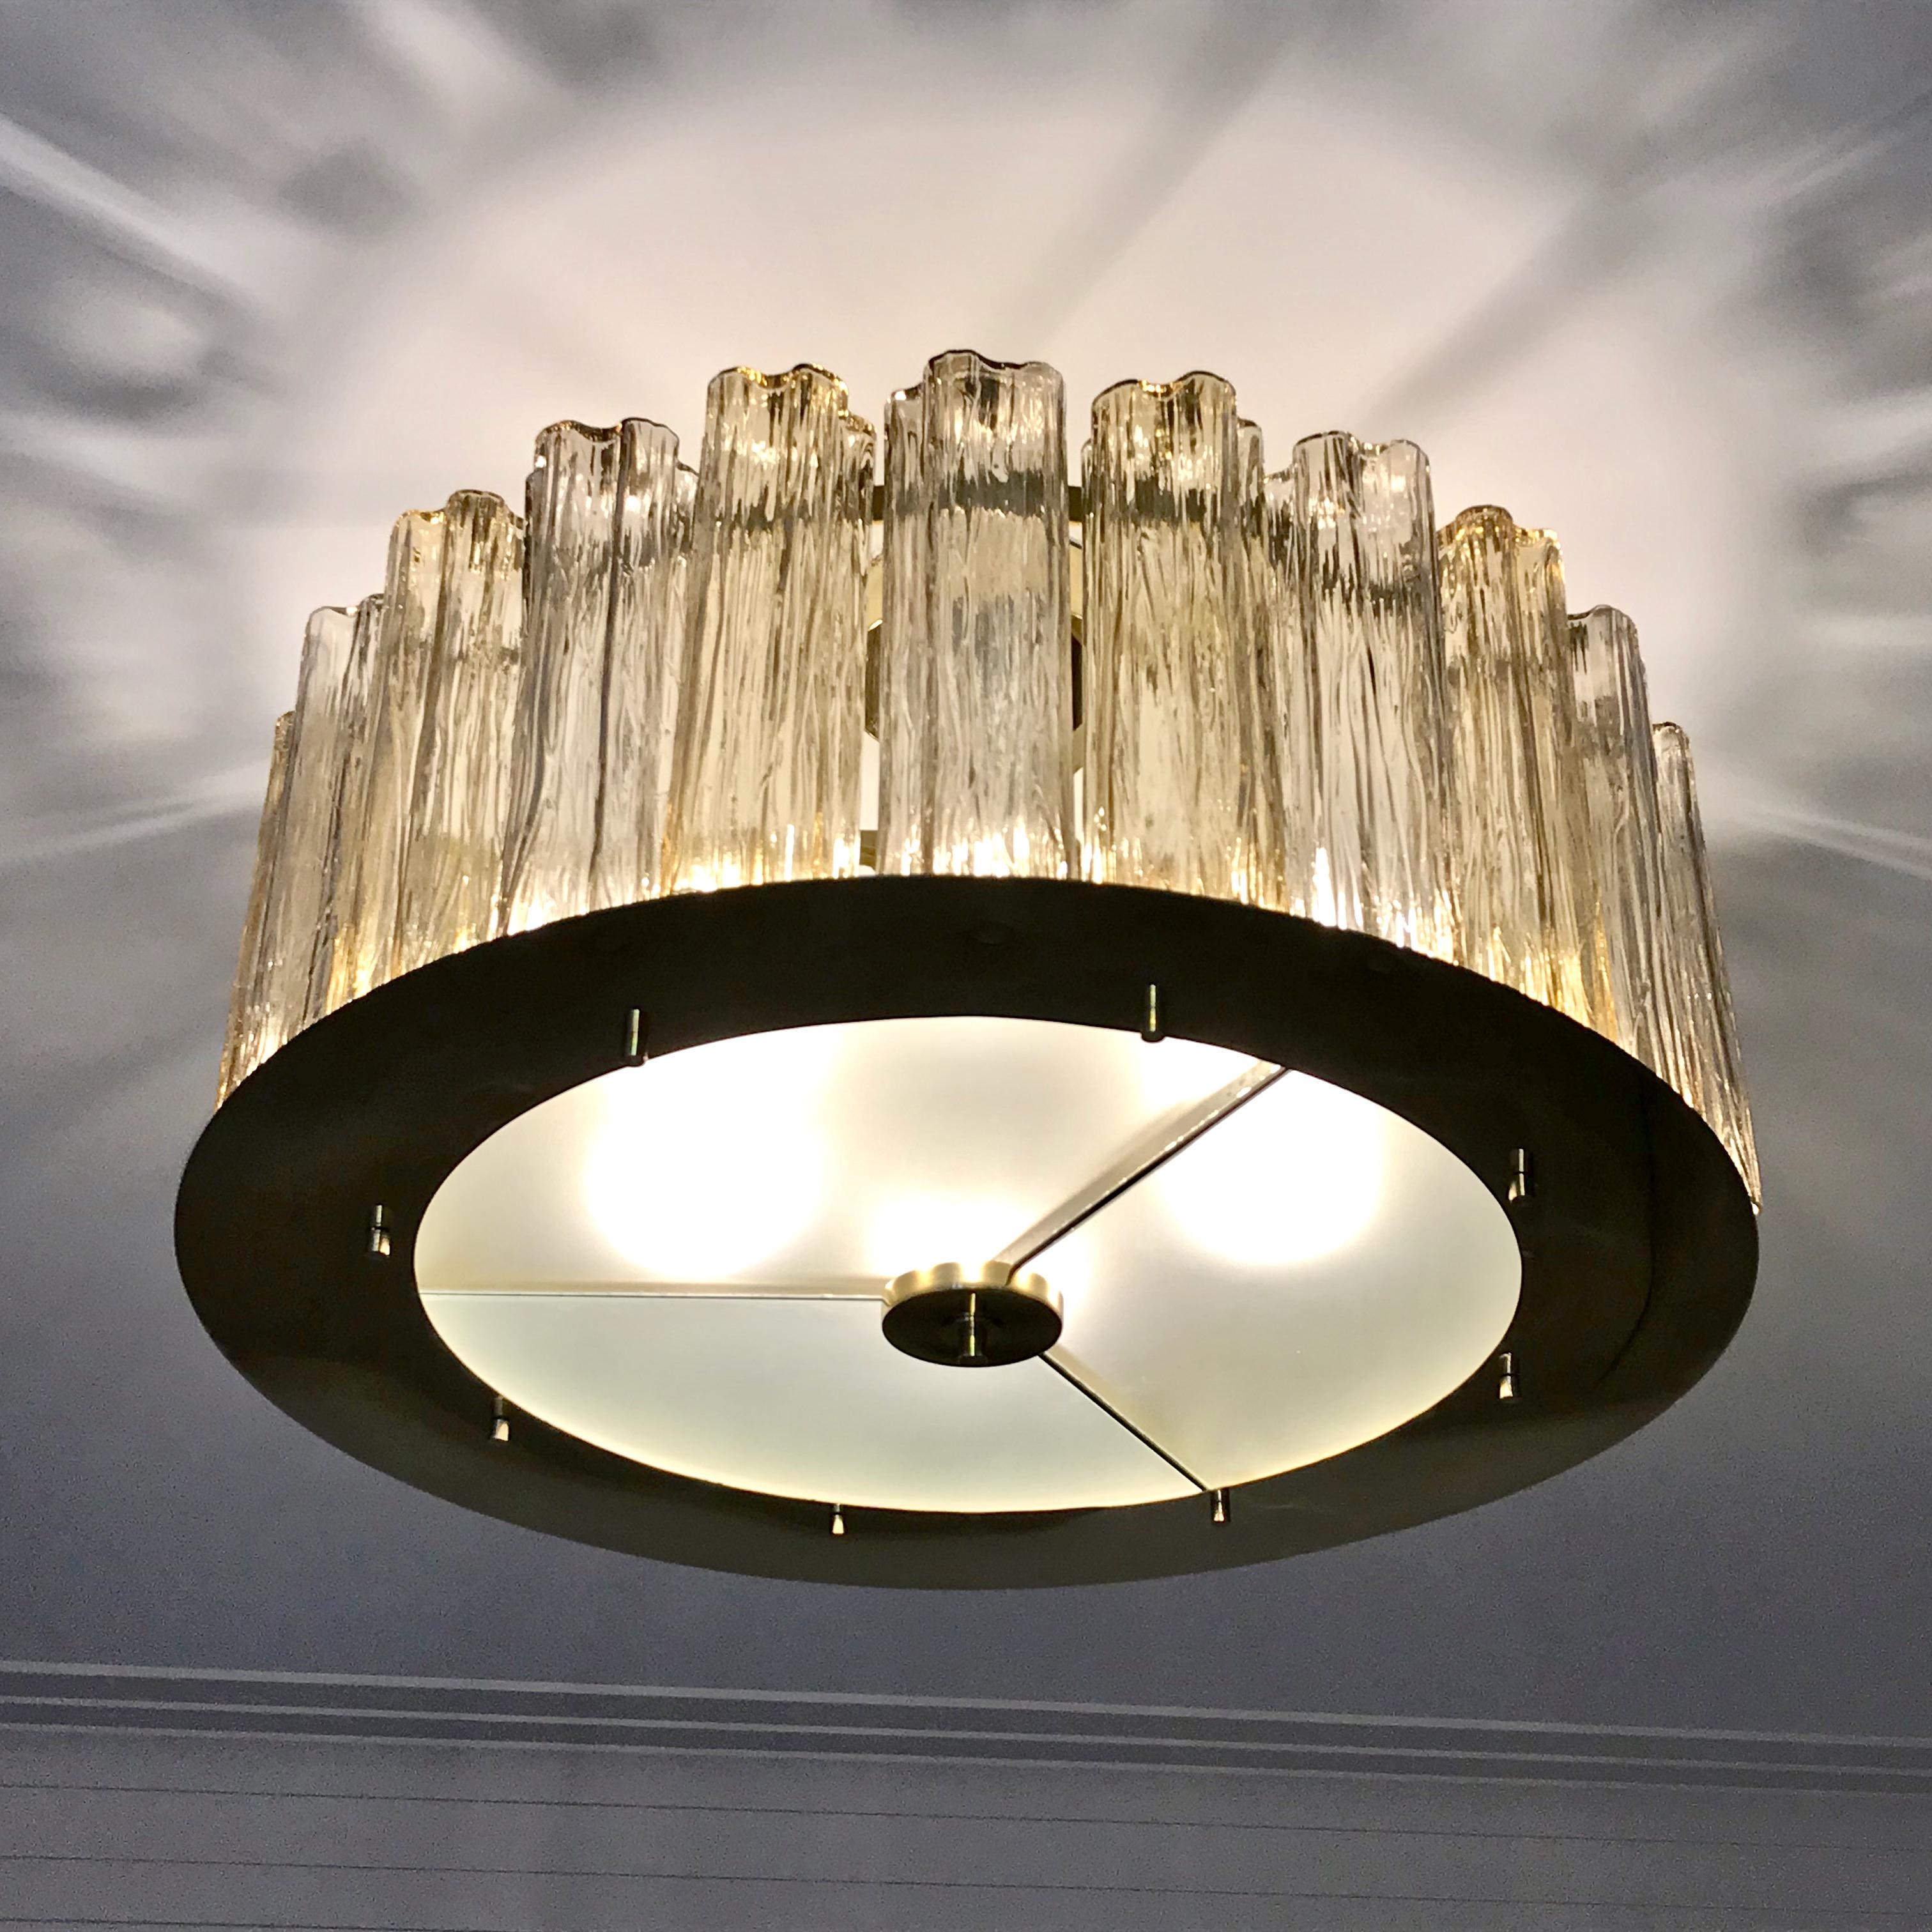 A contemporary Italian bespoke modern chandelier, entirely handcrafted in Italy, customizable as flushmounts or pendants with different colors and finishes, here with a brass structure in a geometric circular shape, highlighted and made precious by